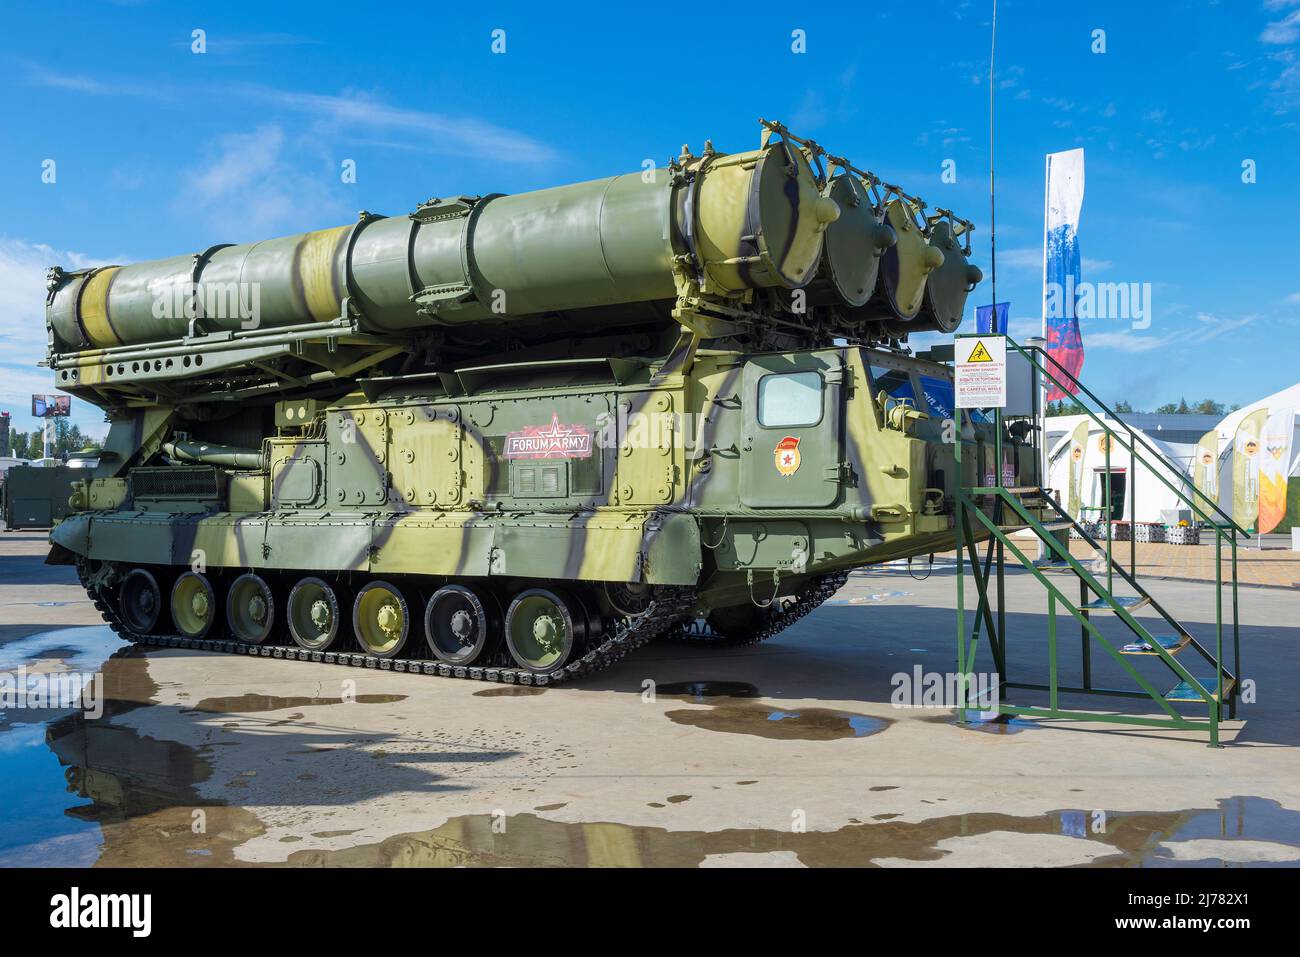 MOSCOW REGION, RUSSIA - AUGUST 27, 2020: Launcher 9A83 of the S-300V anti-aircraft missile system in the Patriot Park exposition. International milita Stock Photo